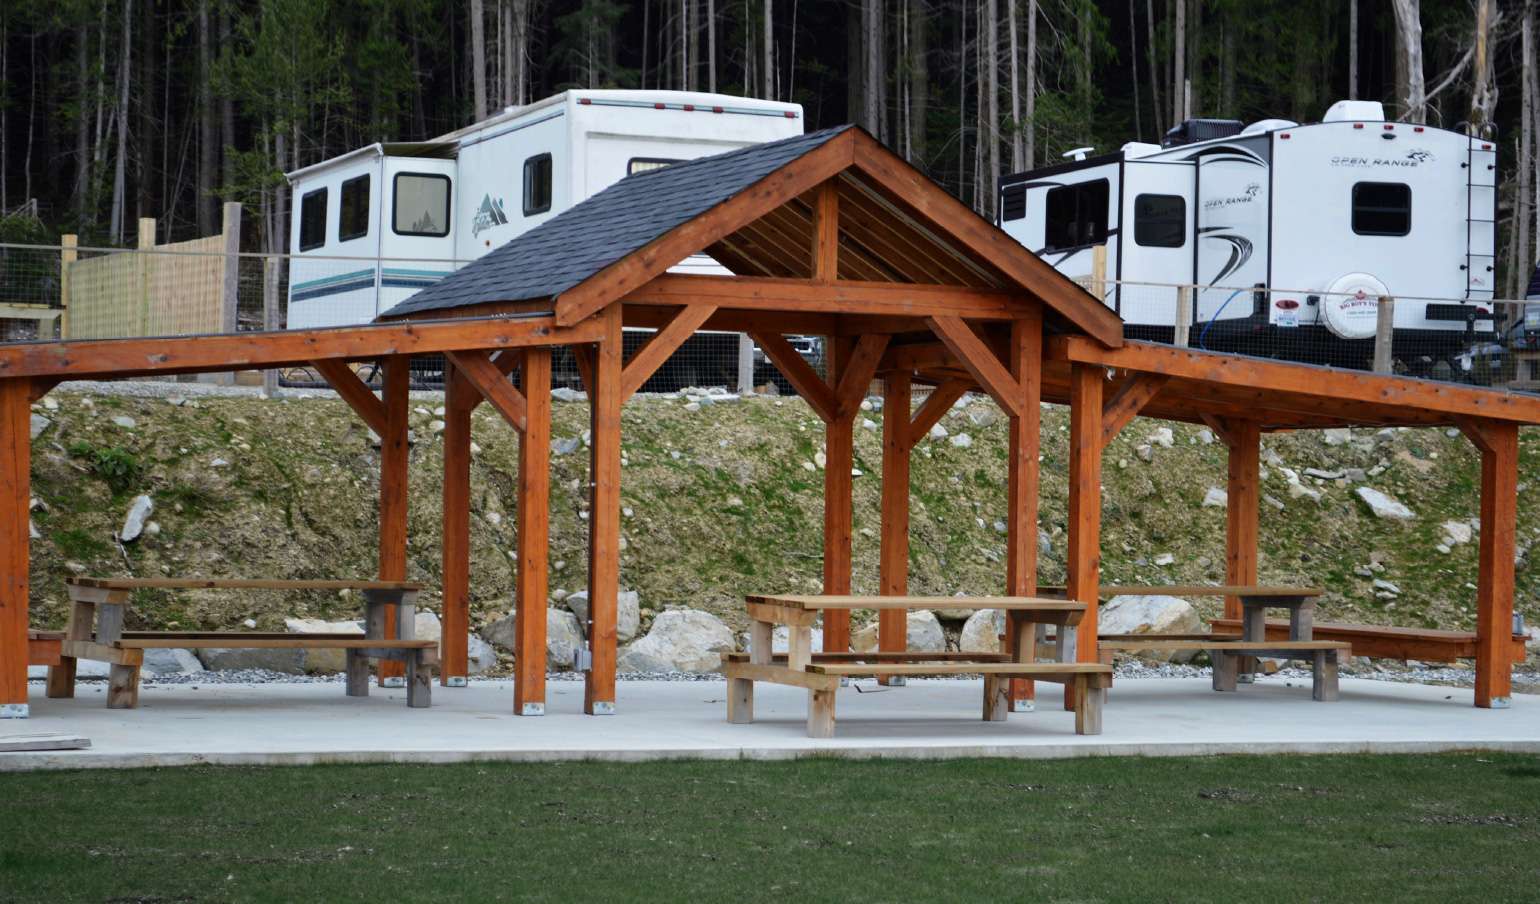 Covered picnic area at rv park